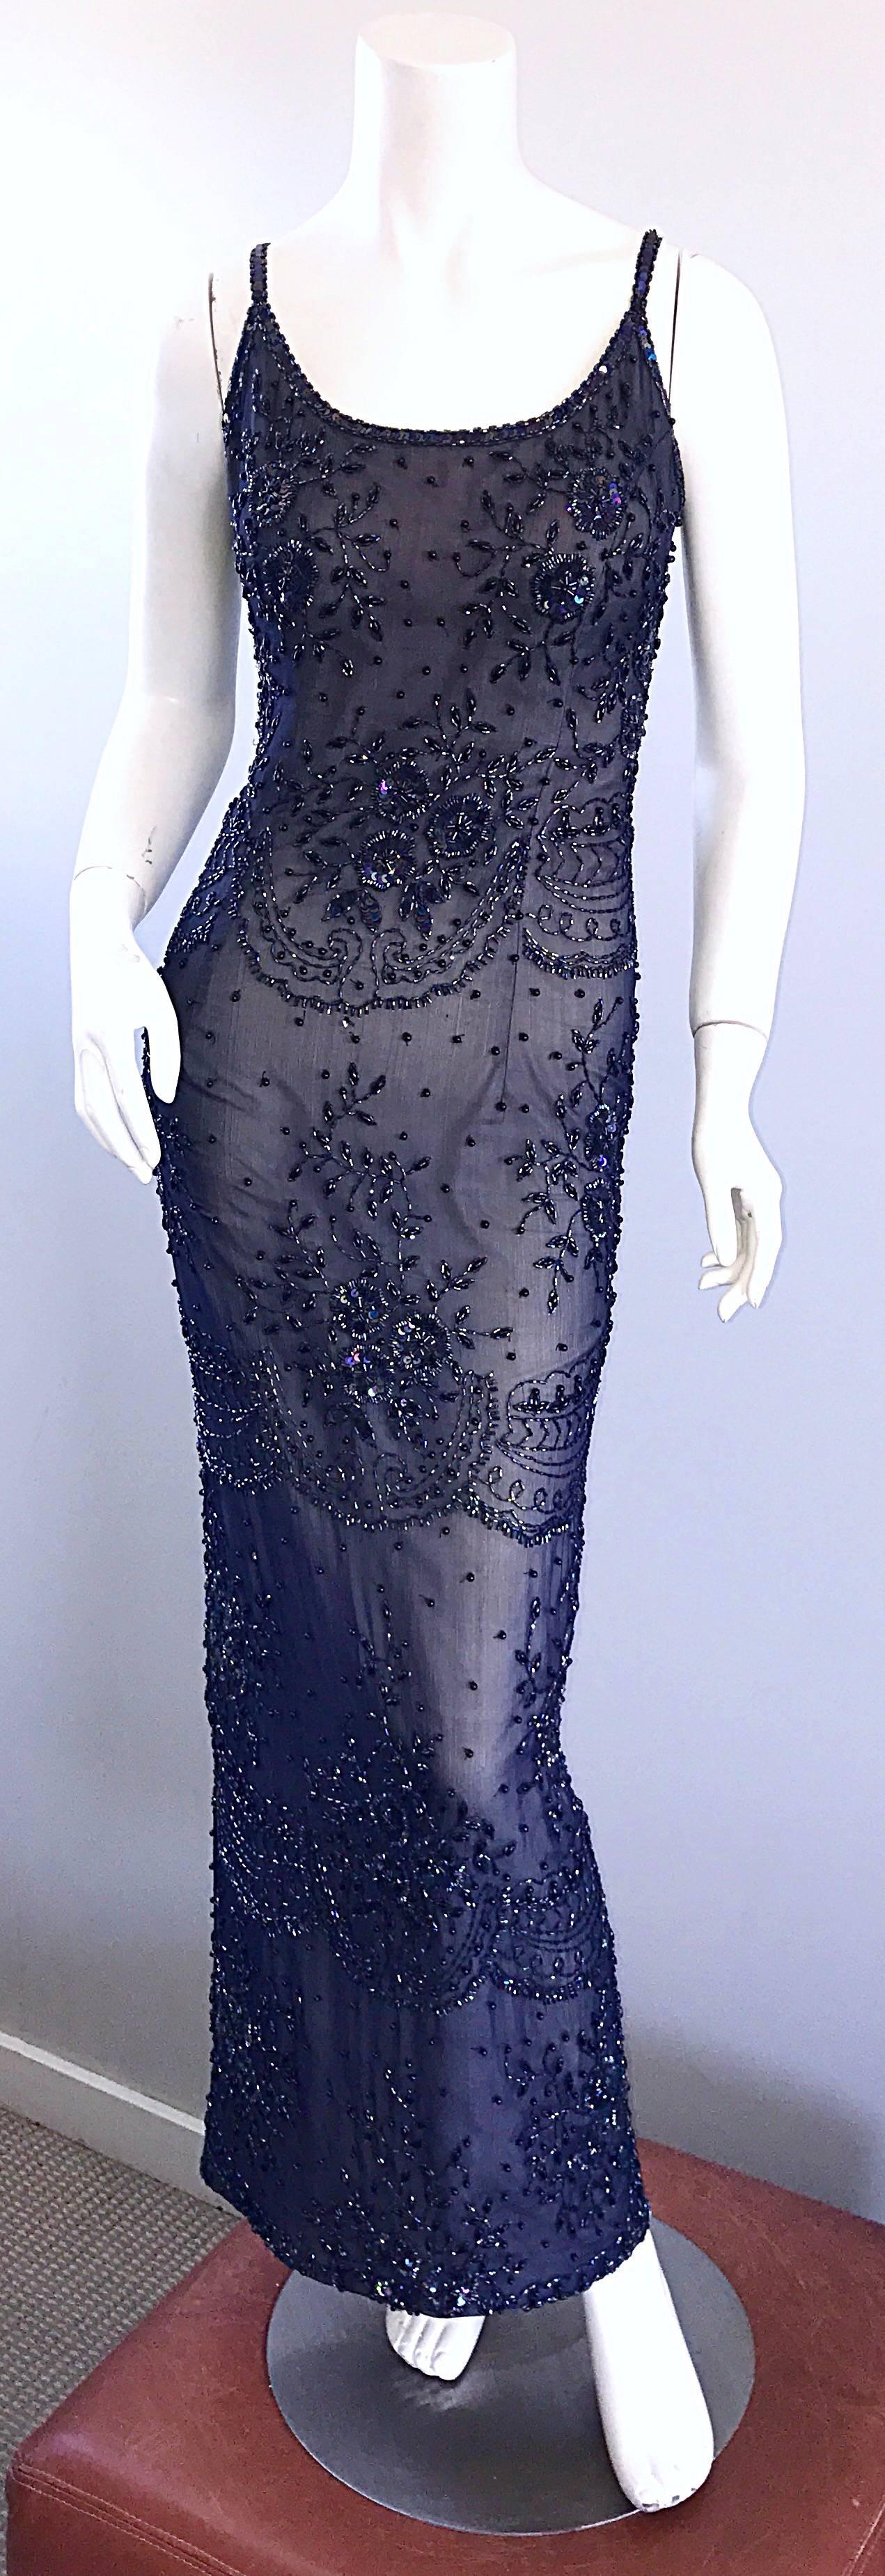 Stunning vintage JUDITH ANN navy blue and grey / nude lining evening gown and lightweight jacket! Both pieces feature iridescent hand-sewn sequins and beads throughout. Dress has a nude gray lining to the knees. The bottom portion of the skirt is